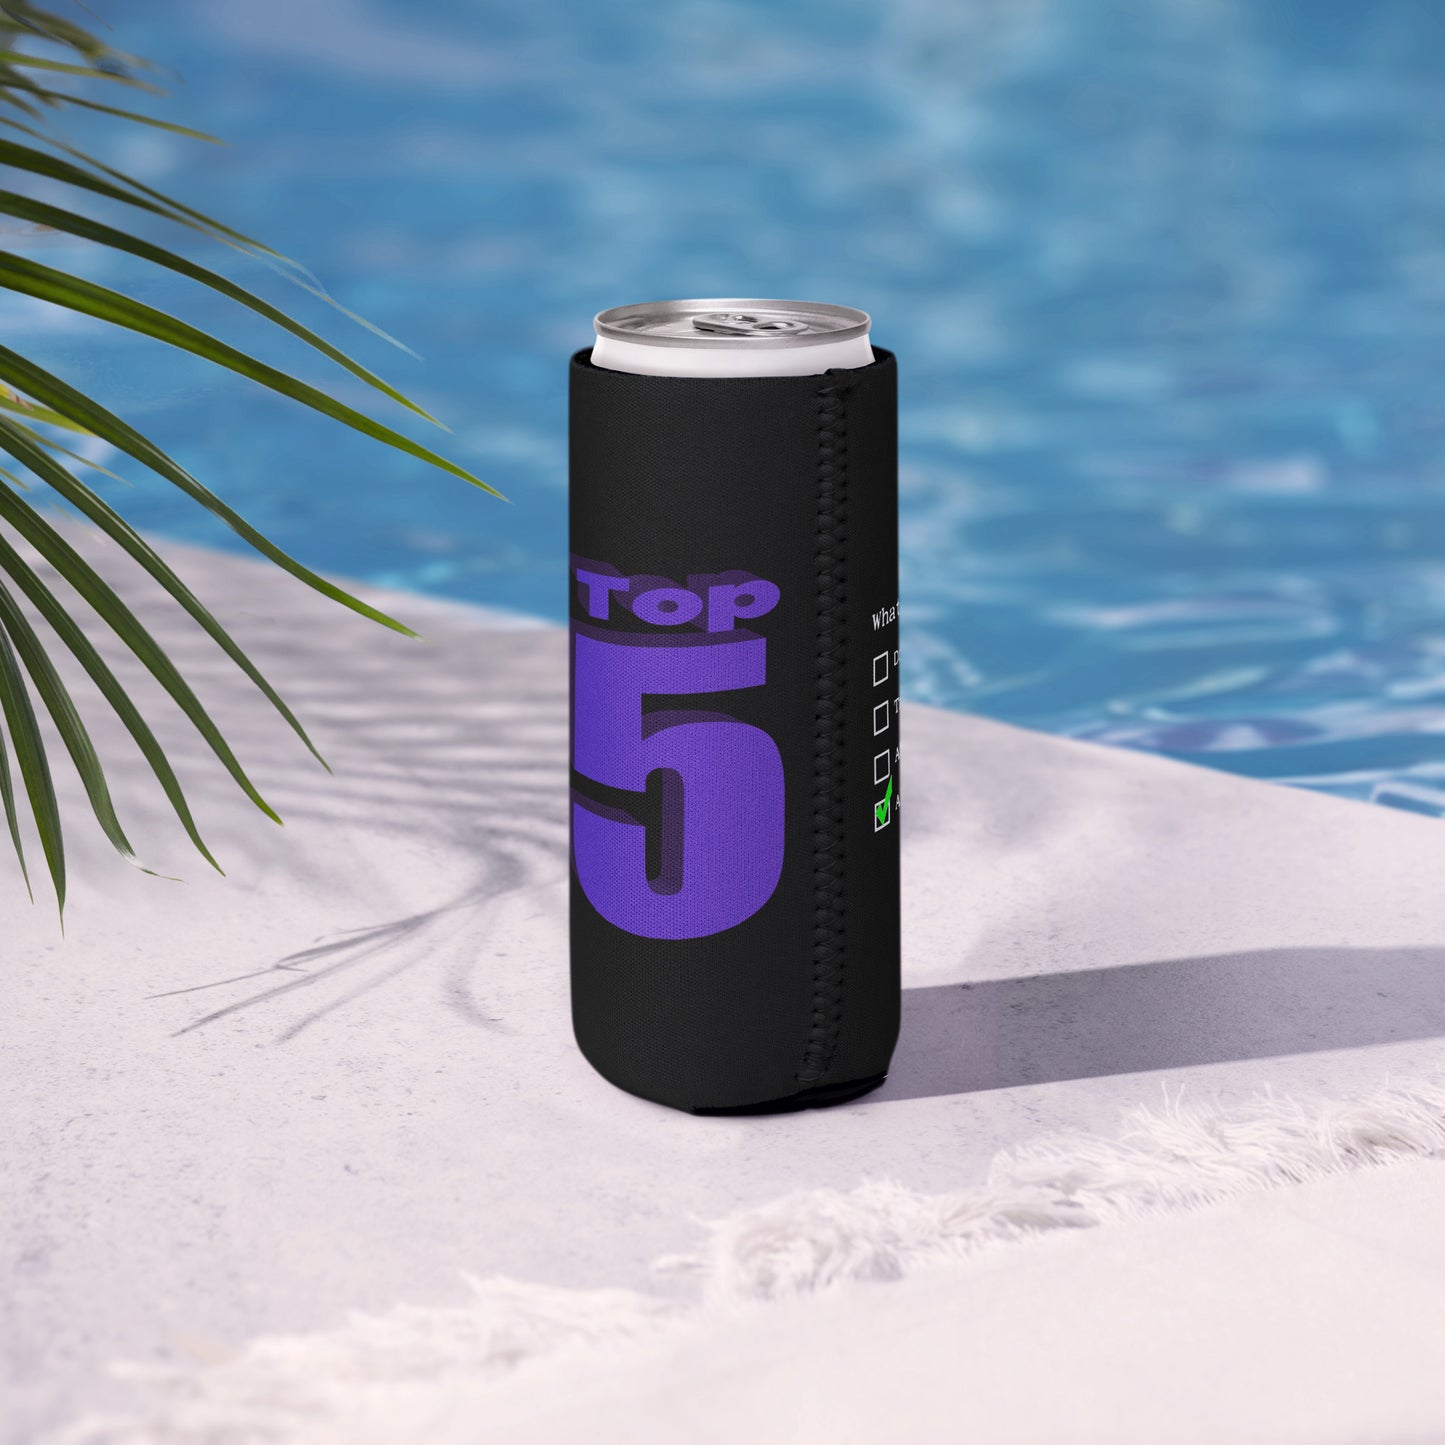 Can drink holder by a pool side in black with Nuke's Top 5 logo and check list printed on coozie